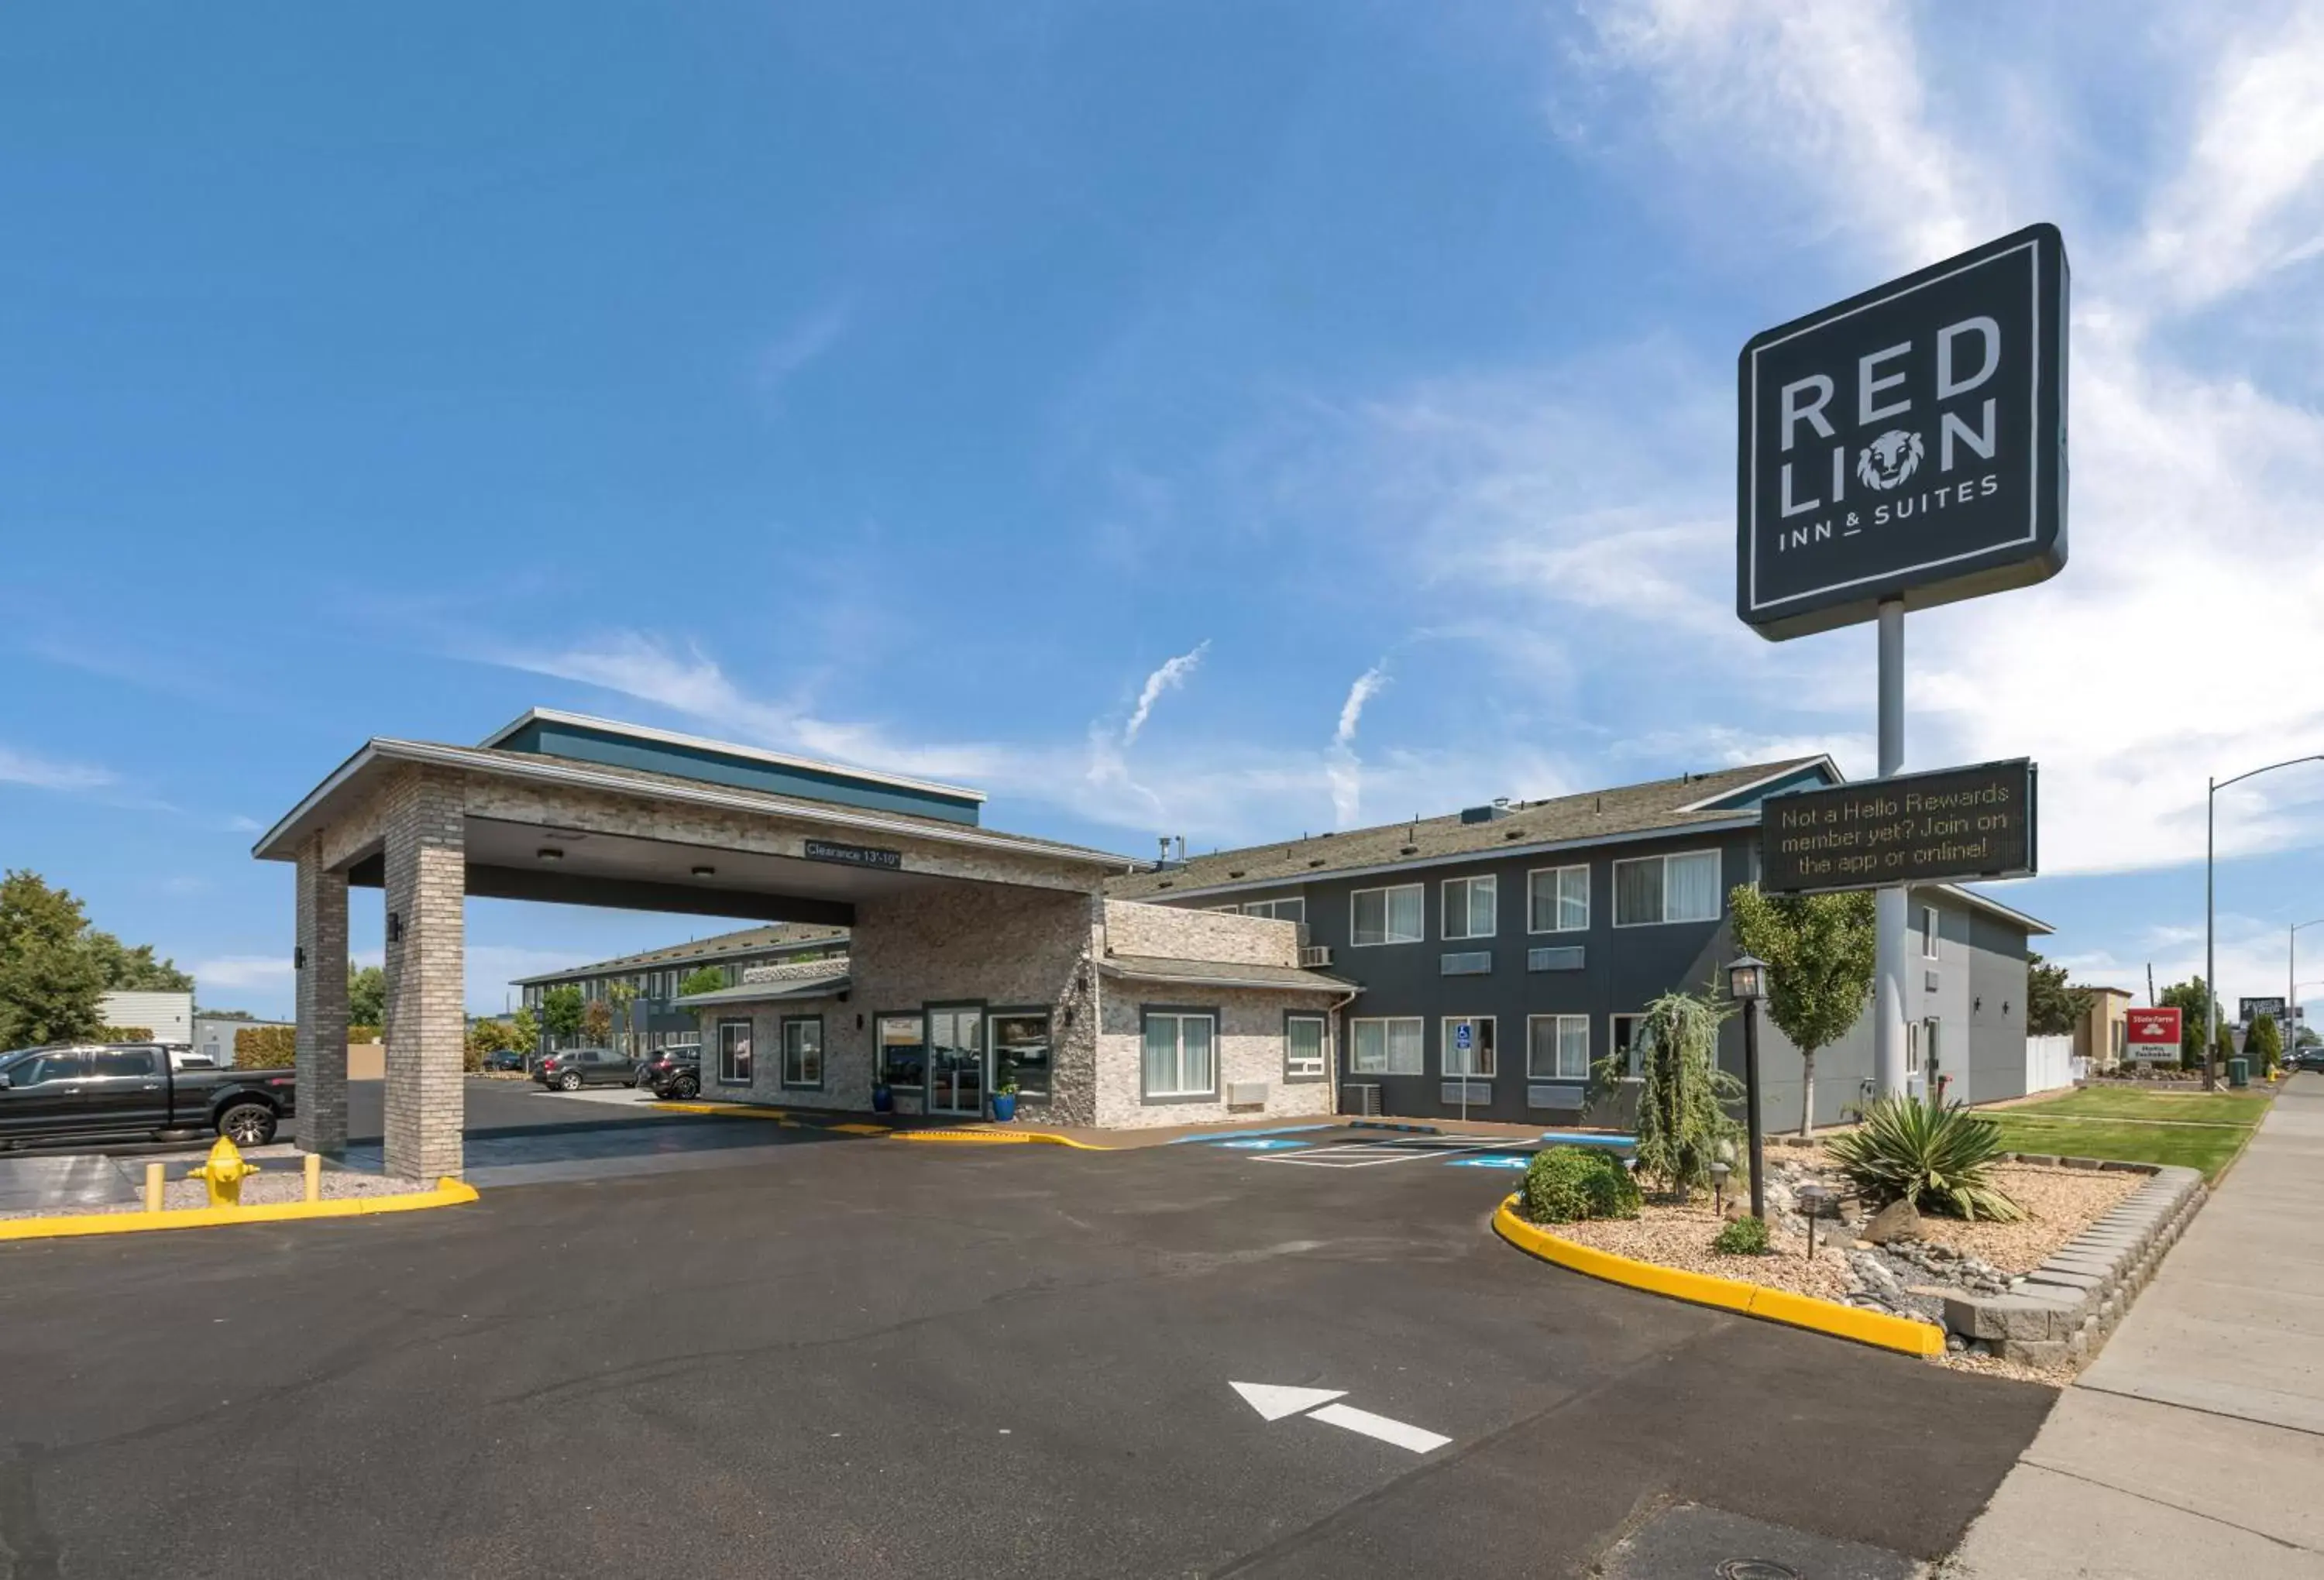 Property building, Facade/Entrance in Red Lion Inn & Suites Kennewick Tri-Cities